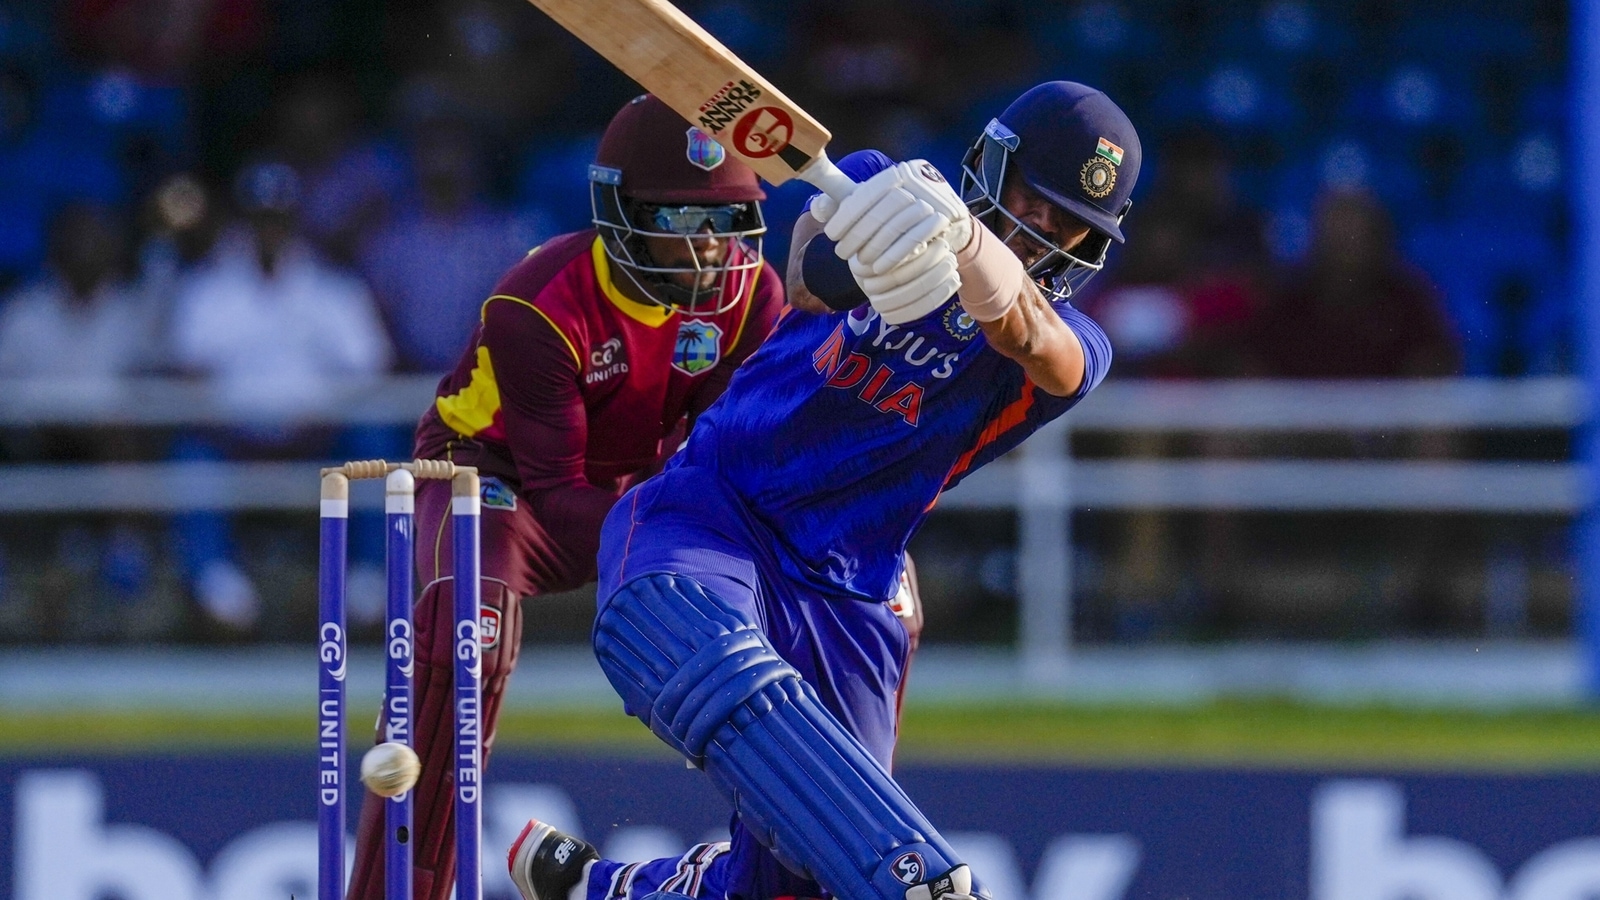 India Vs West Indies 2nd Odi Highlights Axar Patel Heroics Help Ind Secure Thrilling Win Seal